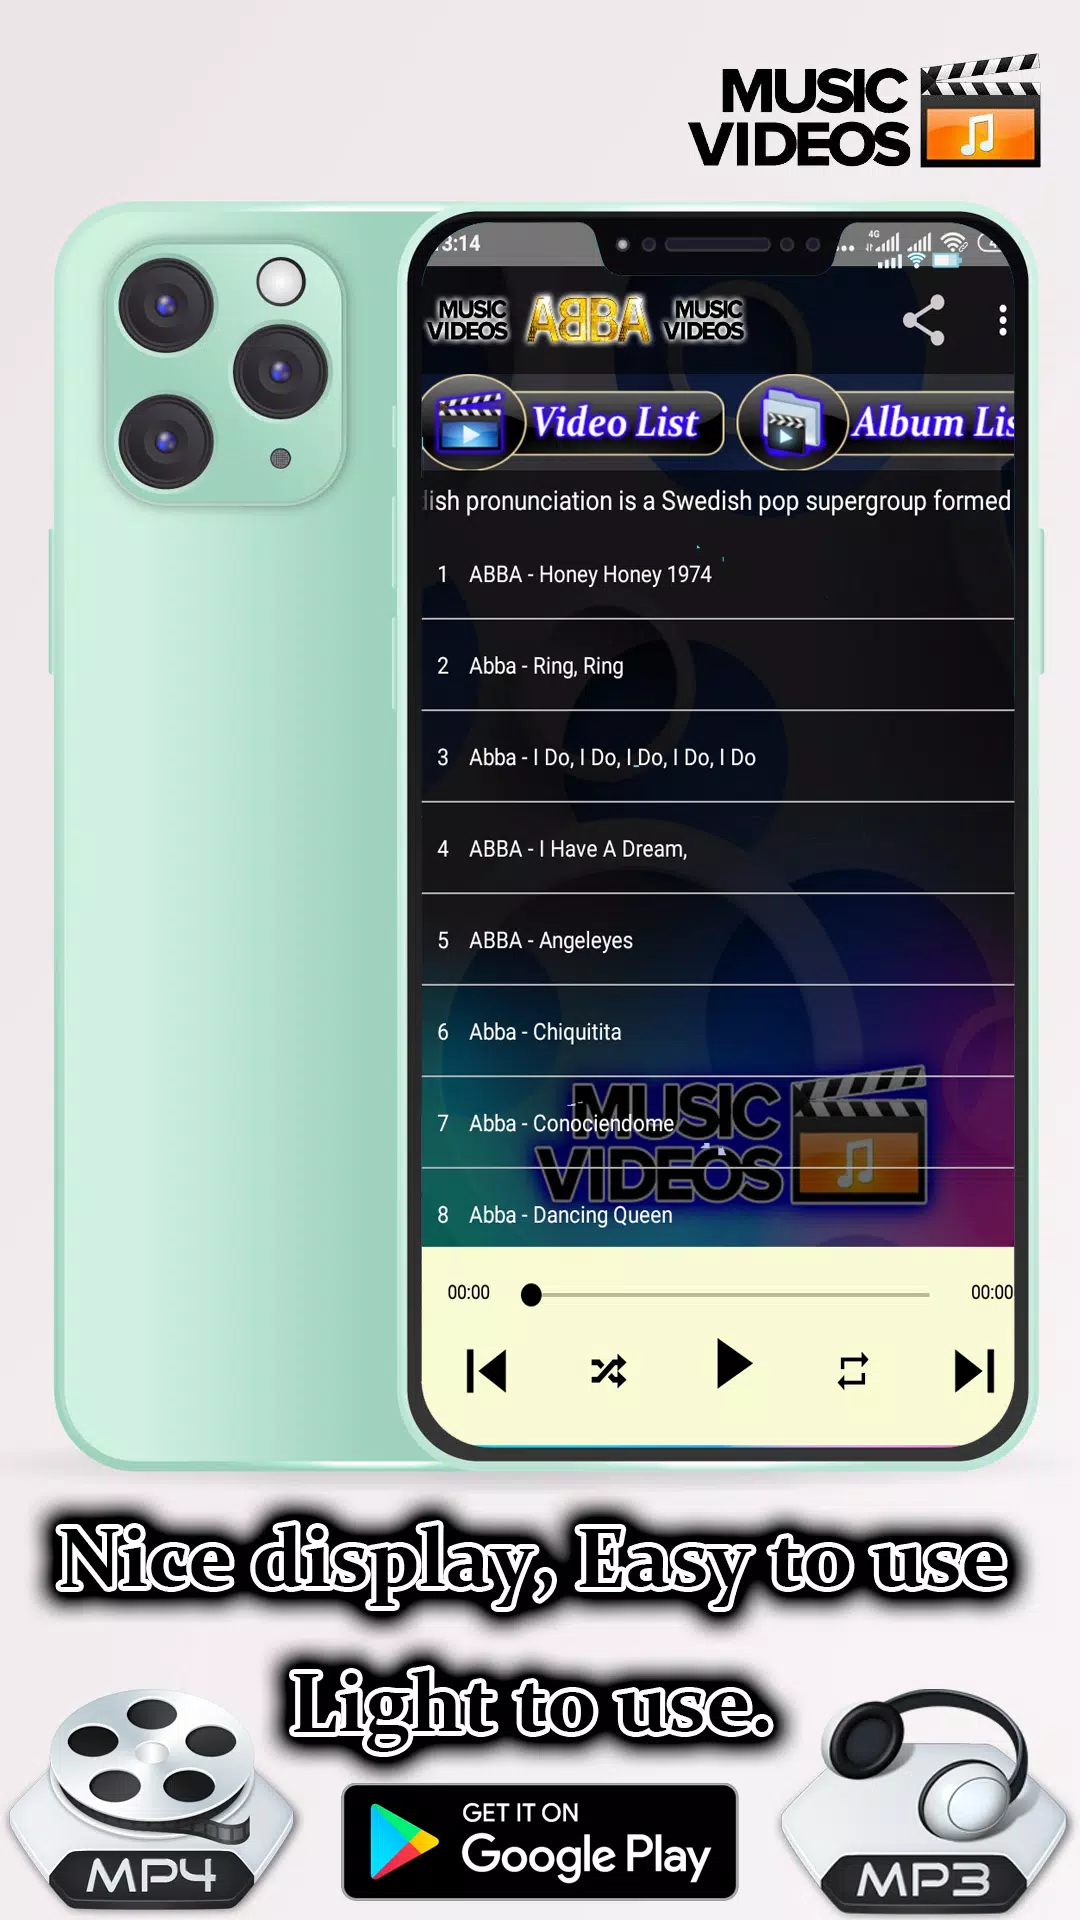 ABBA - Offline MP3 & Video Album Collection APK for Android Download